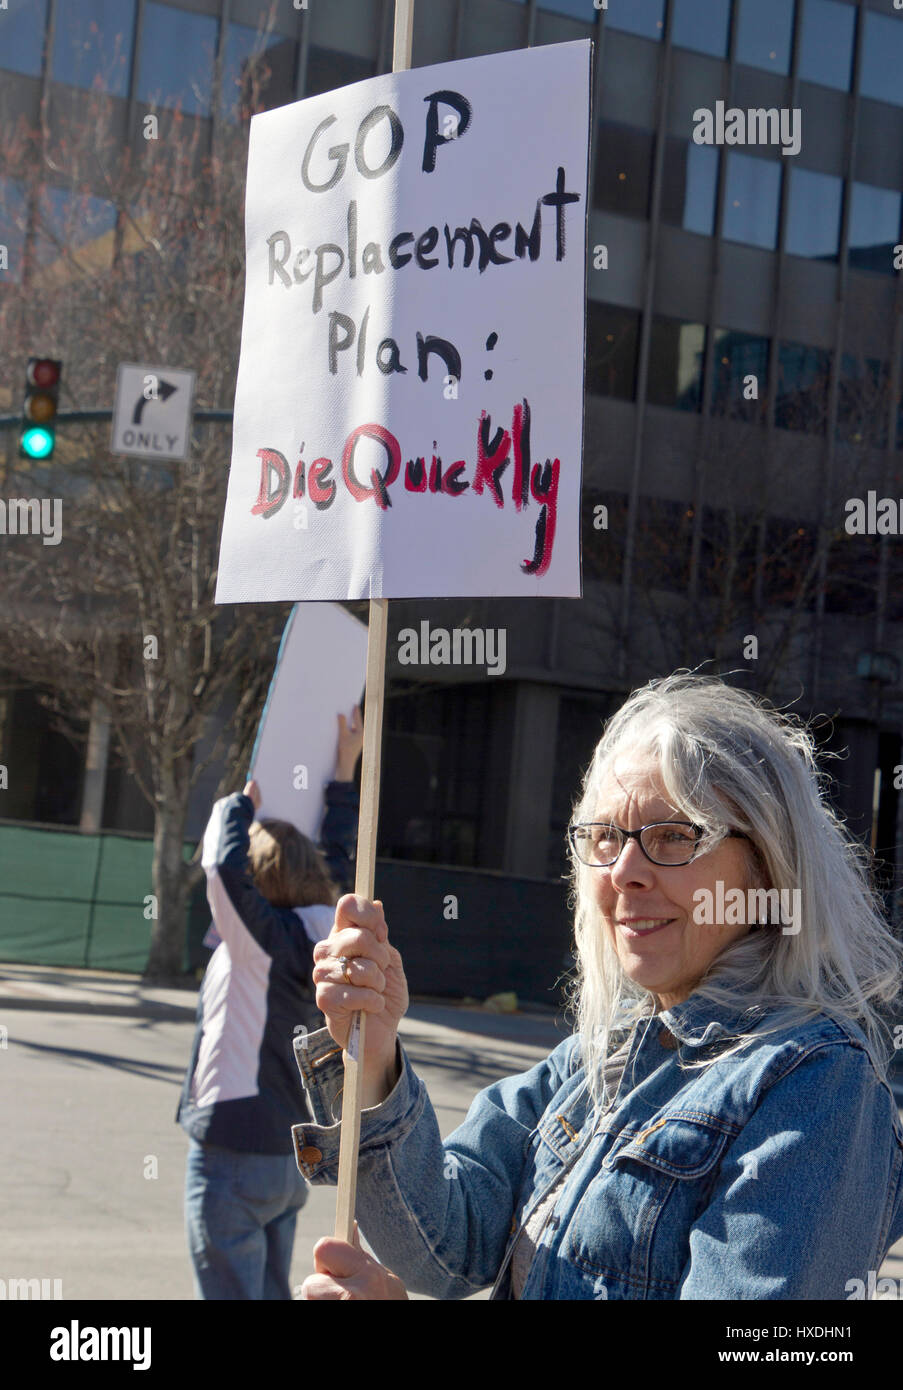 Asheville, North Carolina, USA - February 25, 2017: Senior female activist at an Affordable Care Act rally holds a sign saying 'GOP Replacement Plan:  Stock Photo